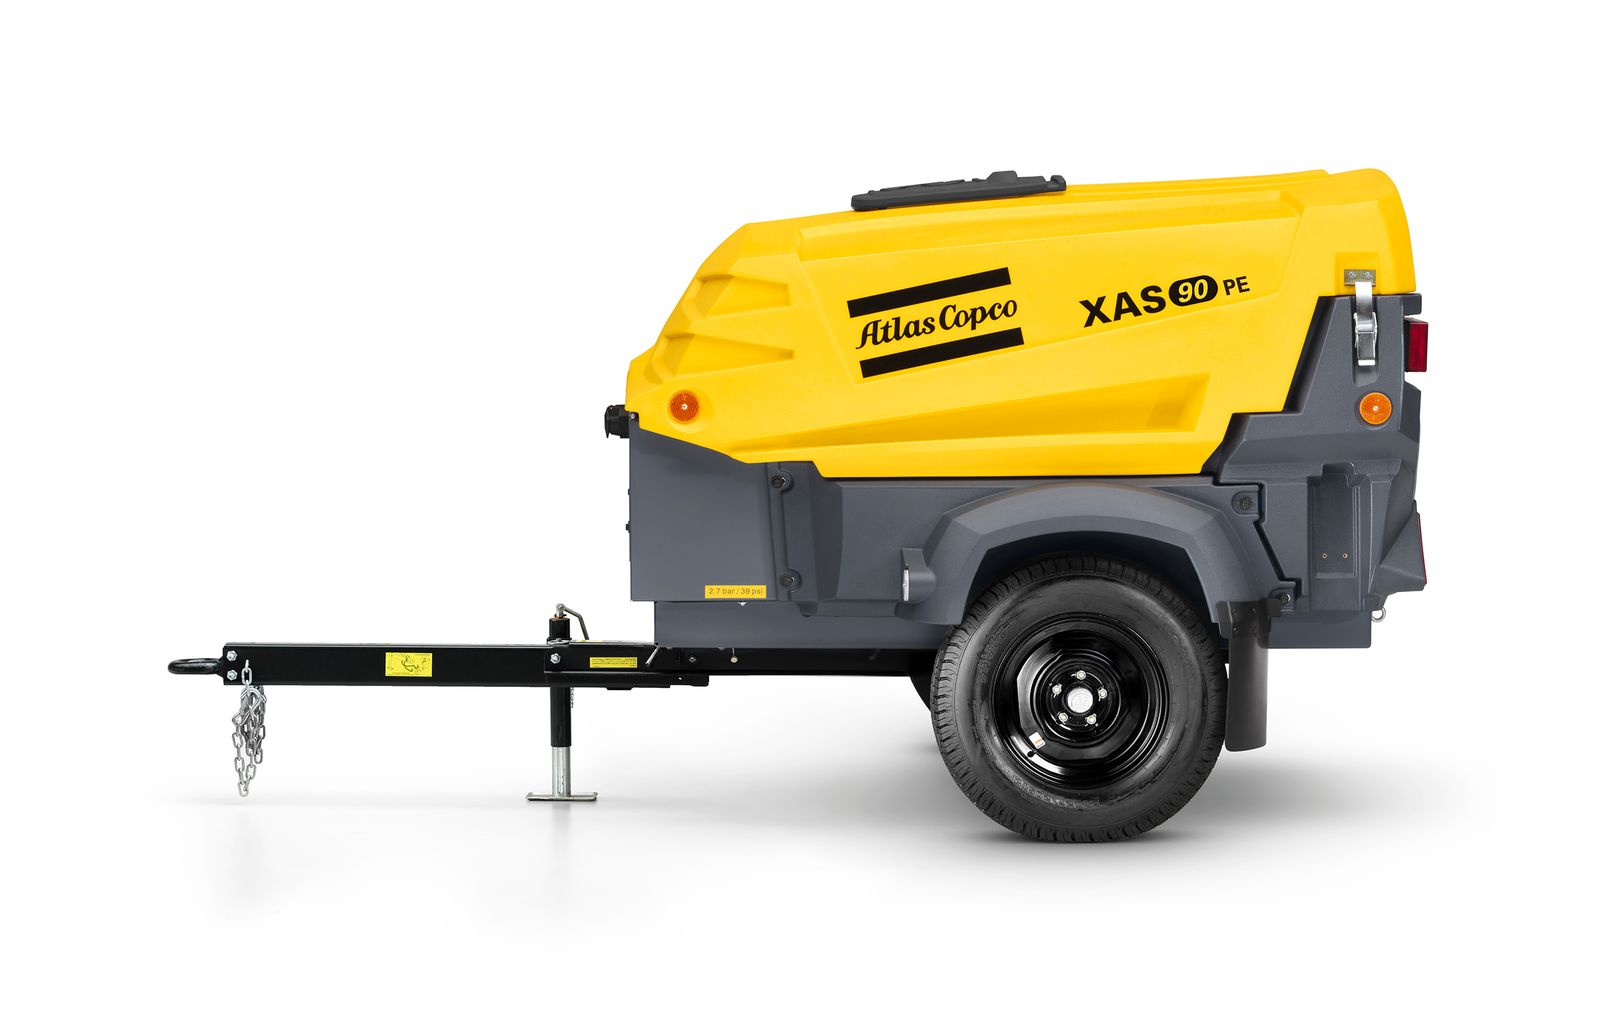 Atlas Copco launched its XAS 90 air compressor, a cost-effective option for utility and pneumatic-tool applications demanding as much as 88 cubic feet per minute of air power.